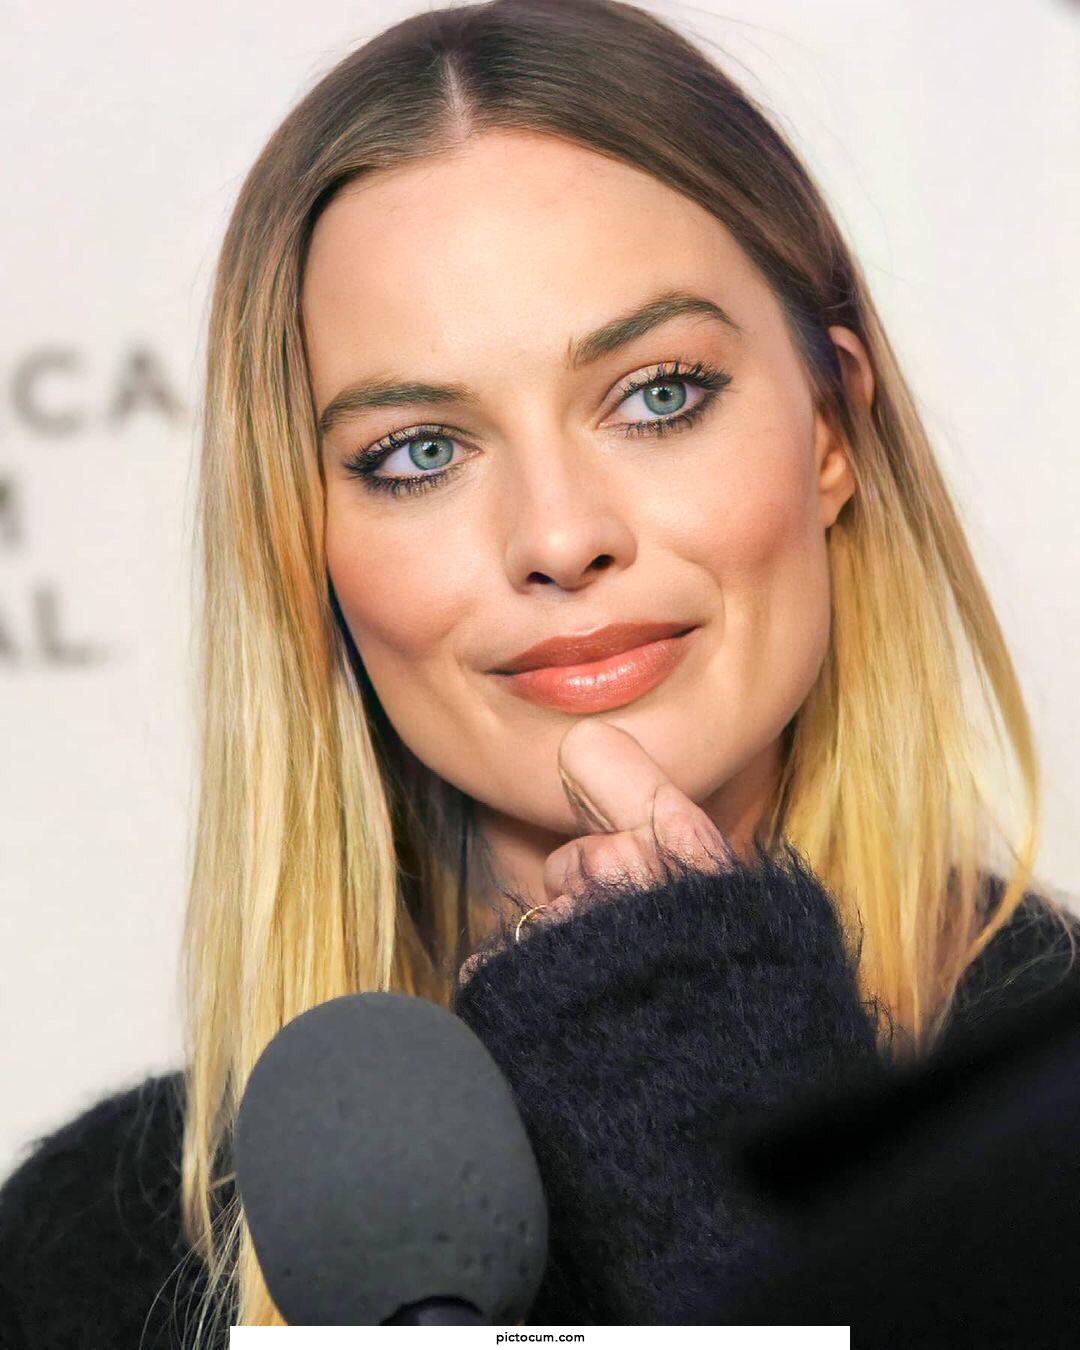 What is Margot Robbie looking at?